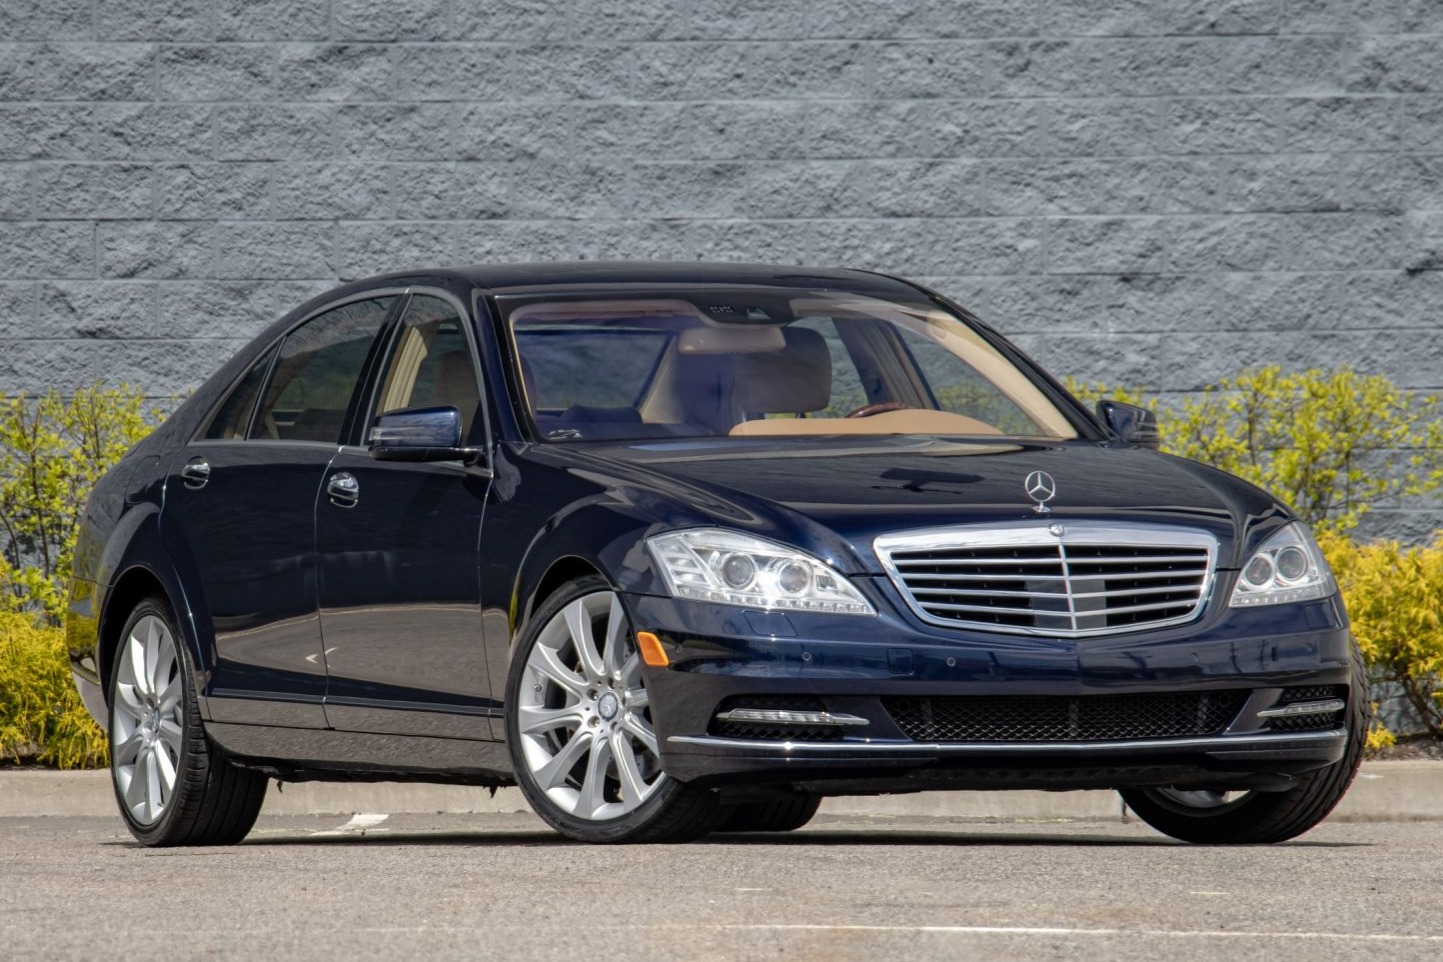 Used 2013 Mercedes-Benz S550 4MATIC Review